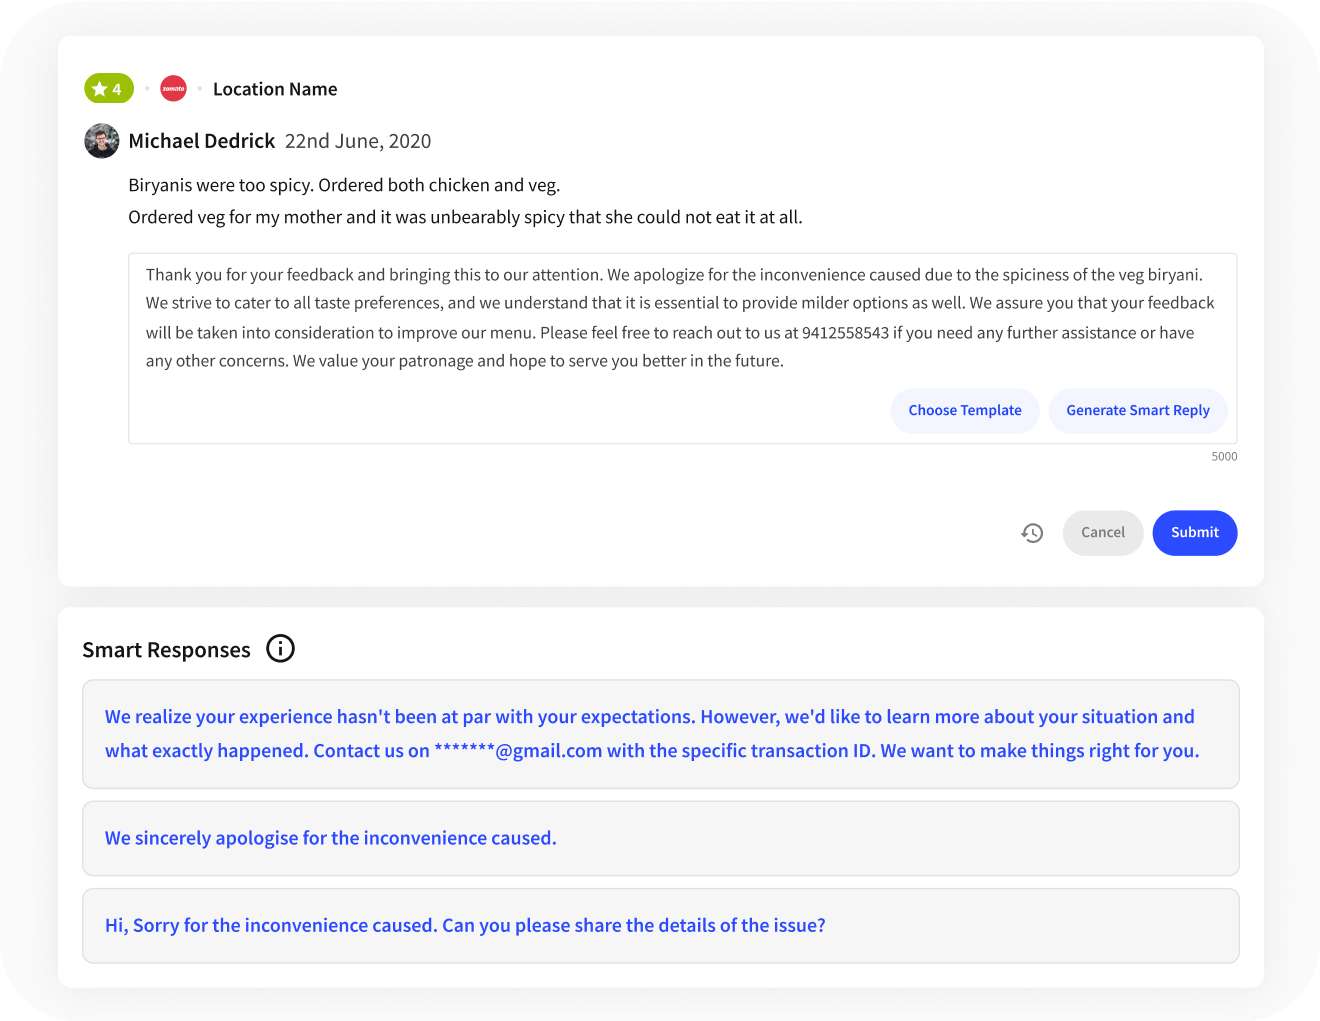 Customer service interface showing a negative review response with suggested smart replies for efficient communication.